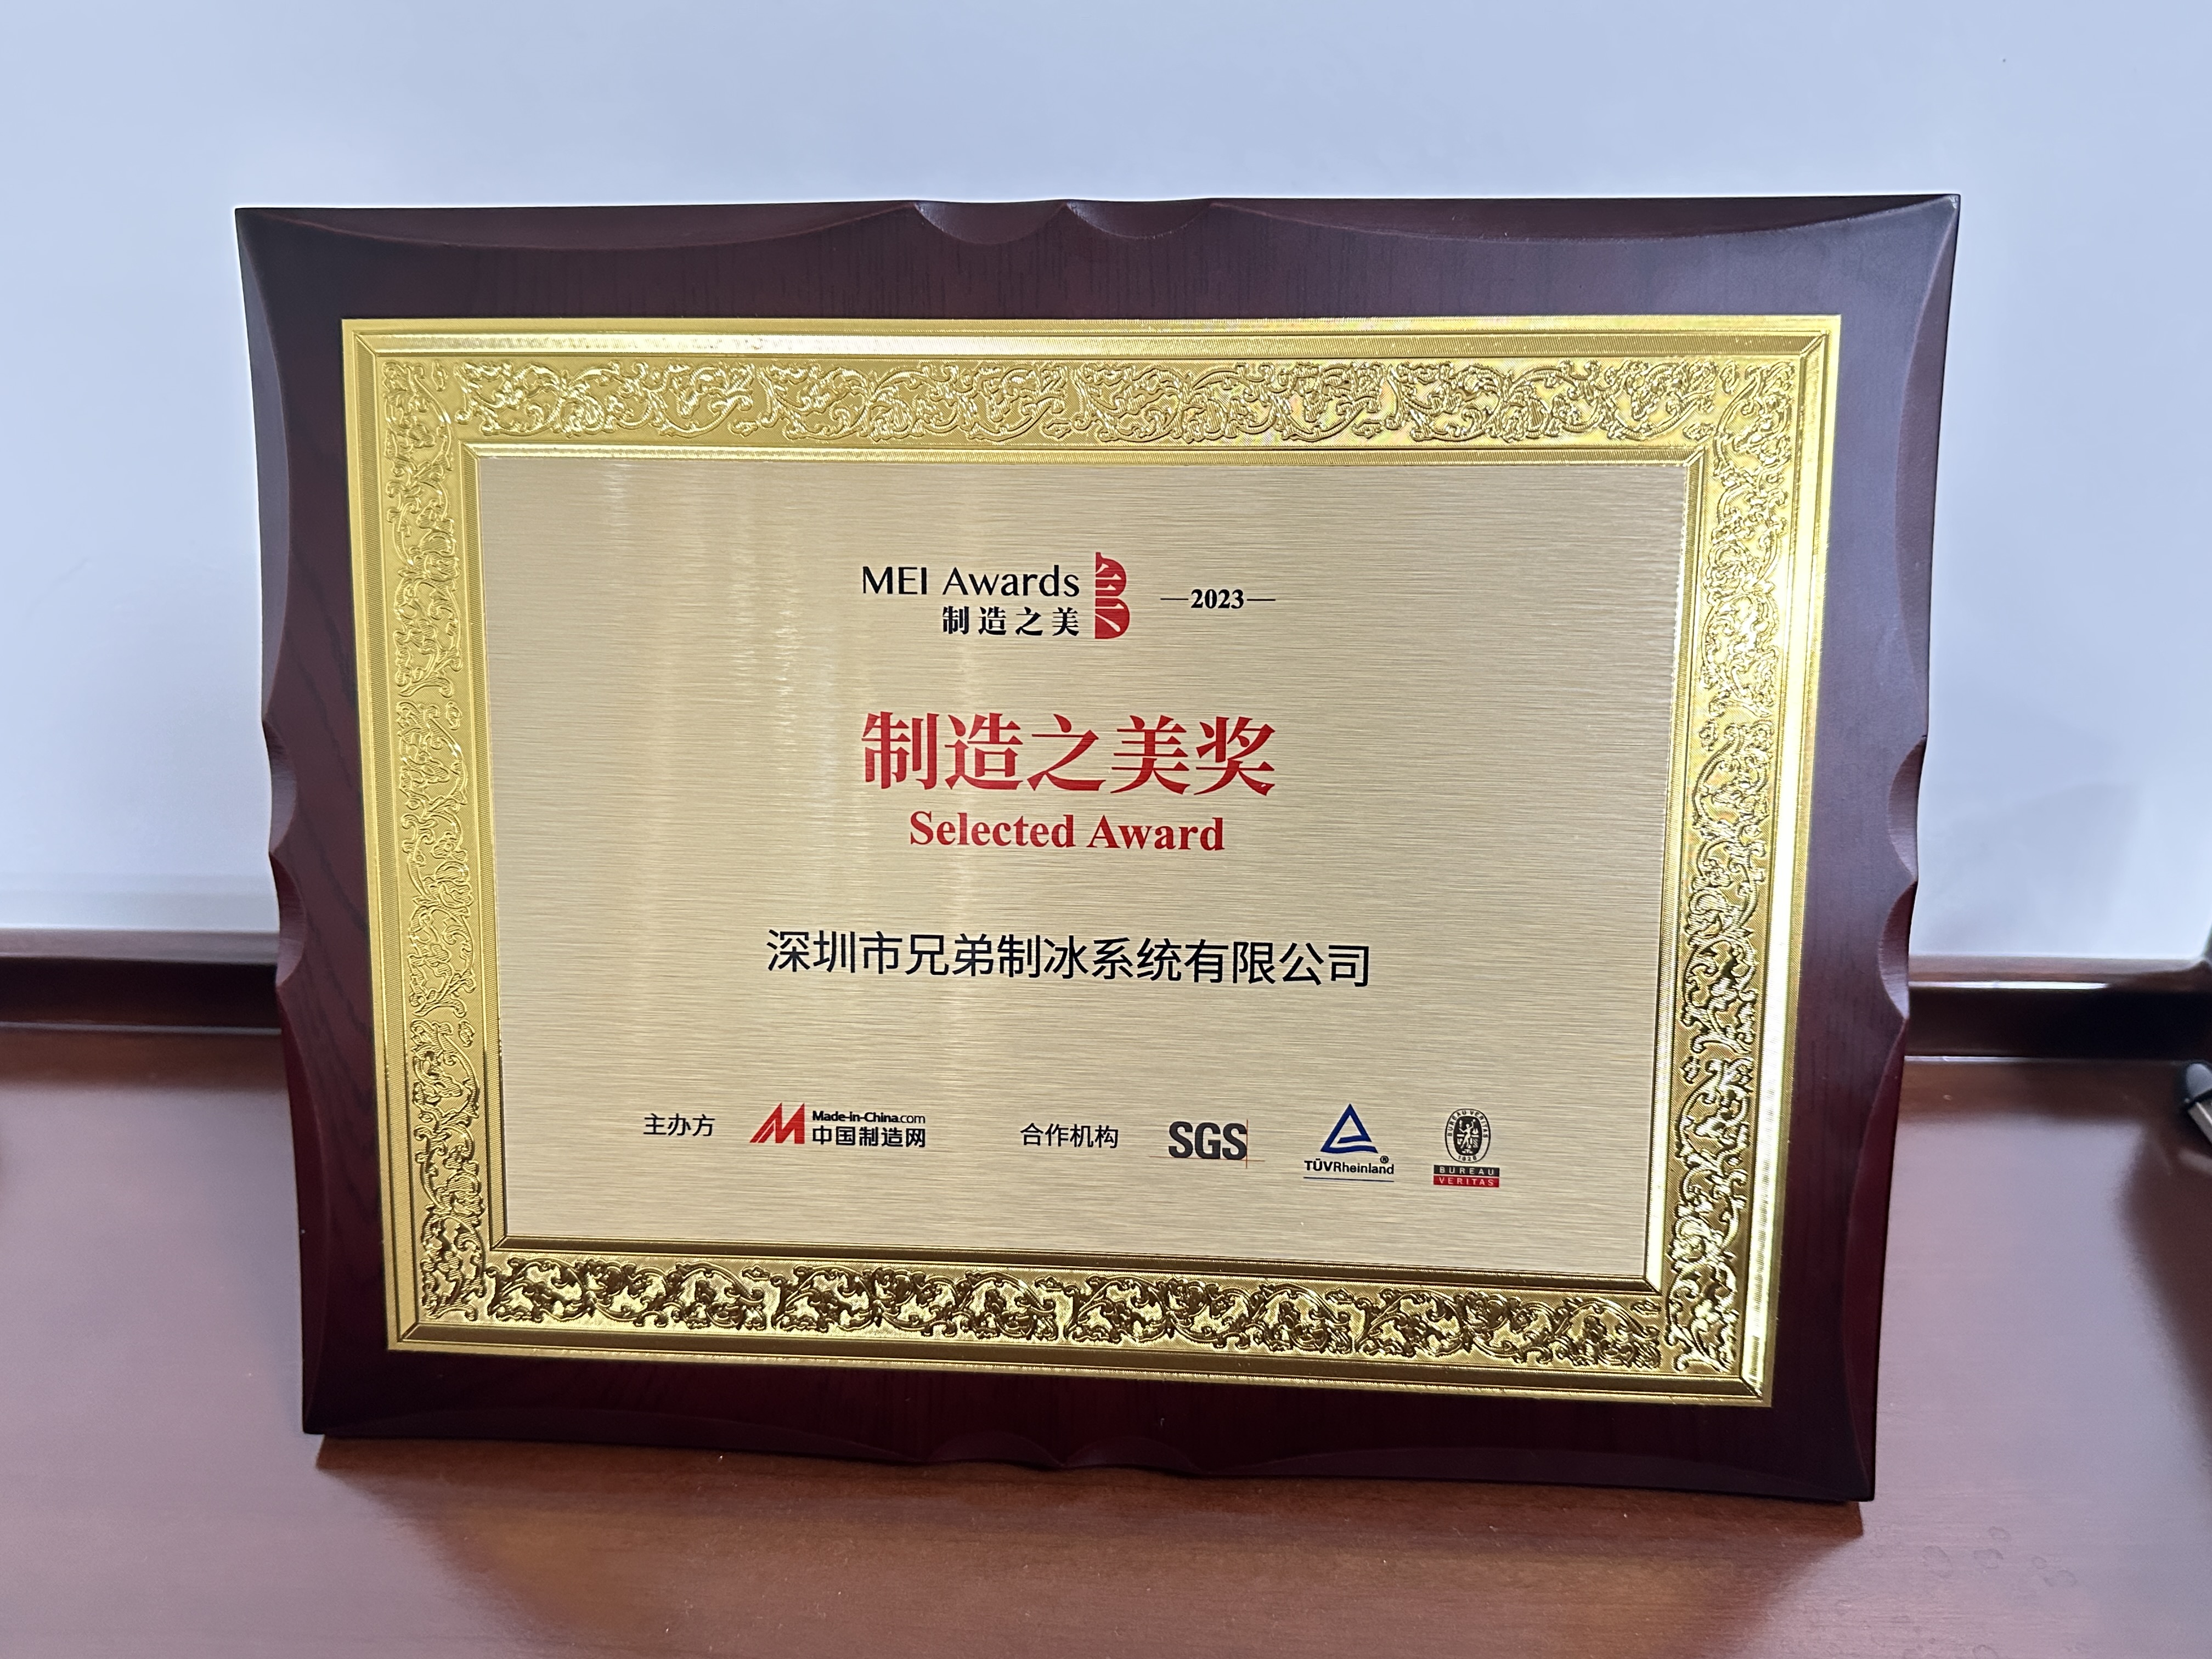 ICESTA won the 2023 "MEI Awards" in the 2023 Manufacturing Excellence & Innovation Awards annual selection